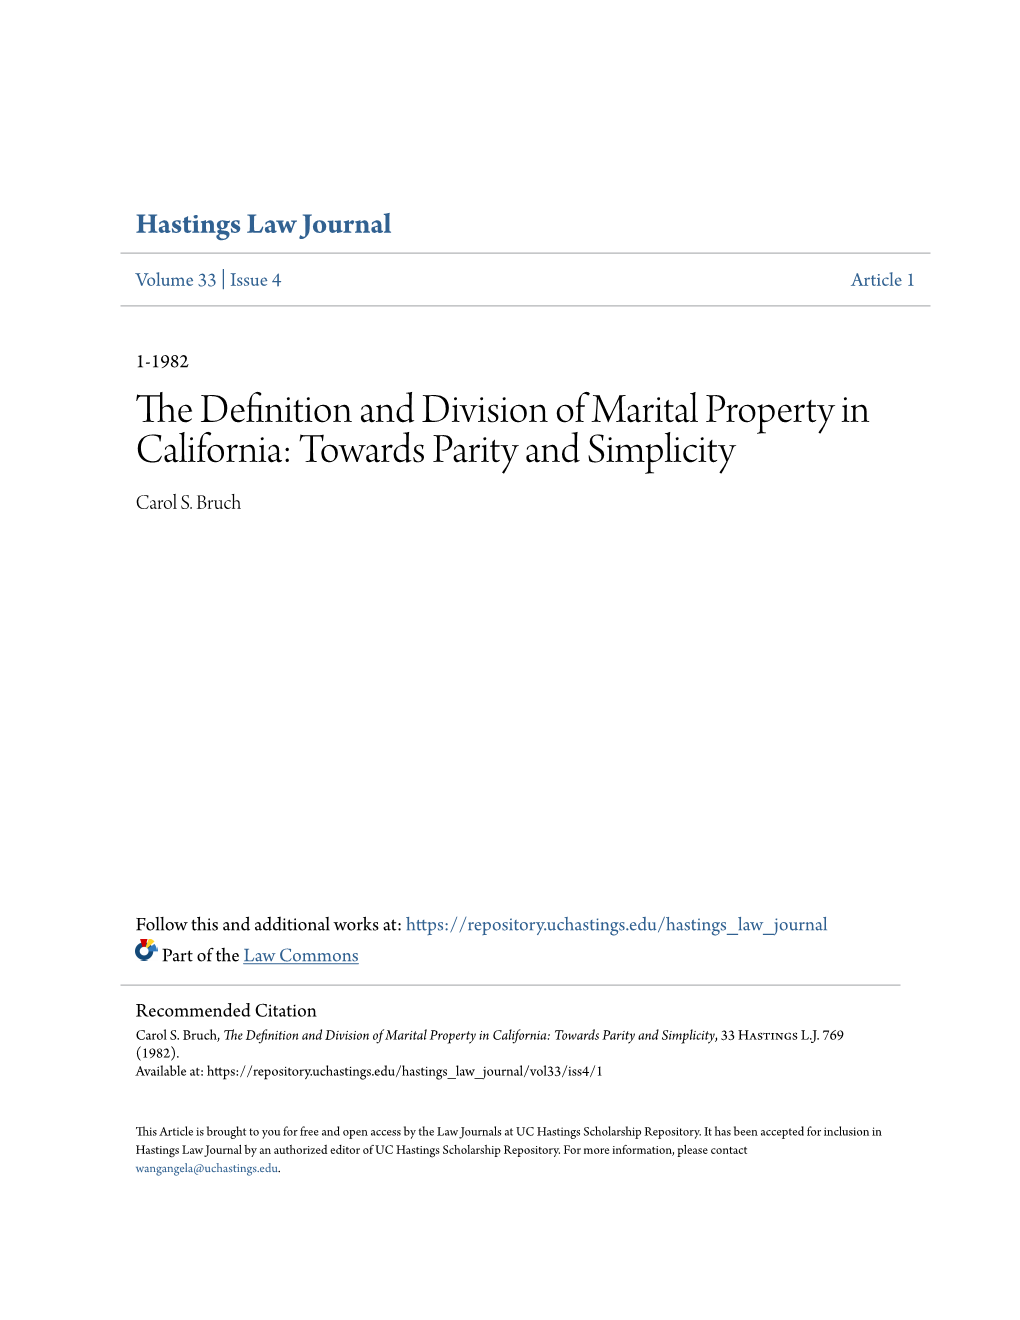 The Definition and Division of Marital Property in California: Towards Parity and Simplicity, 33 Hastings L.J